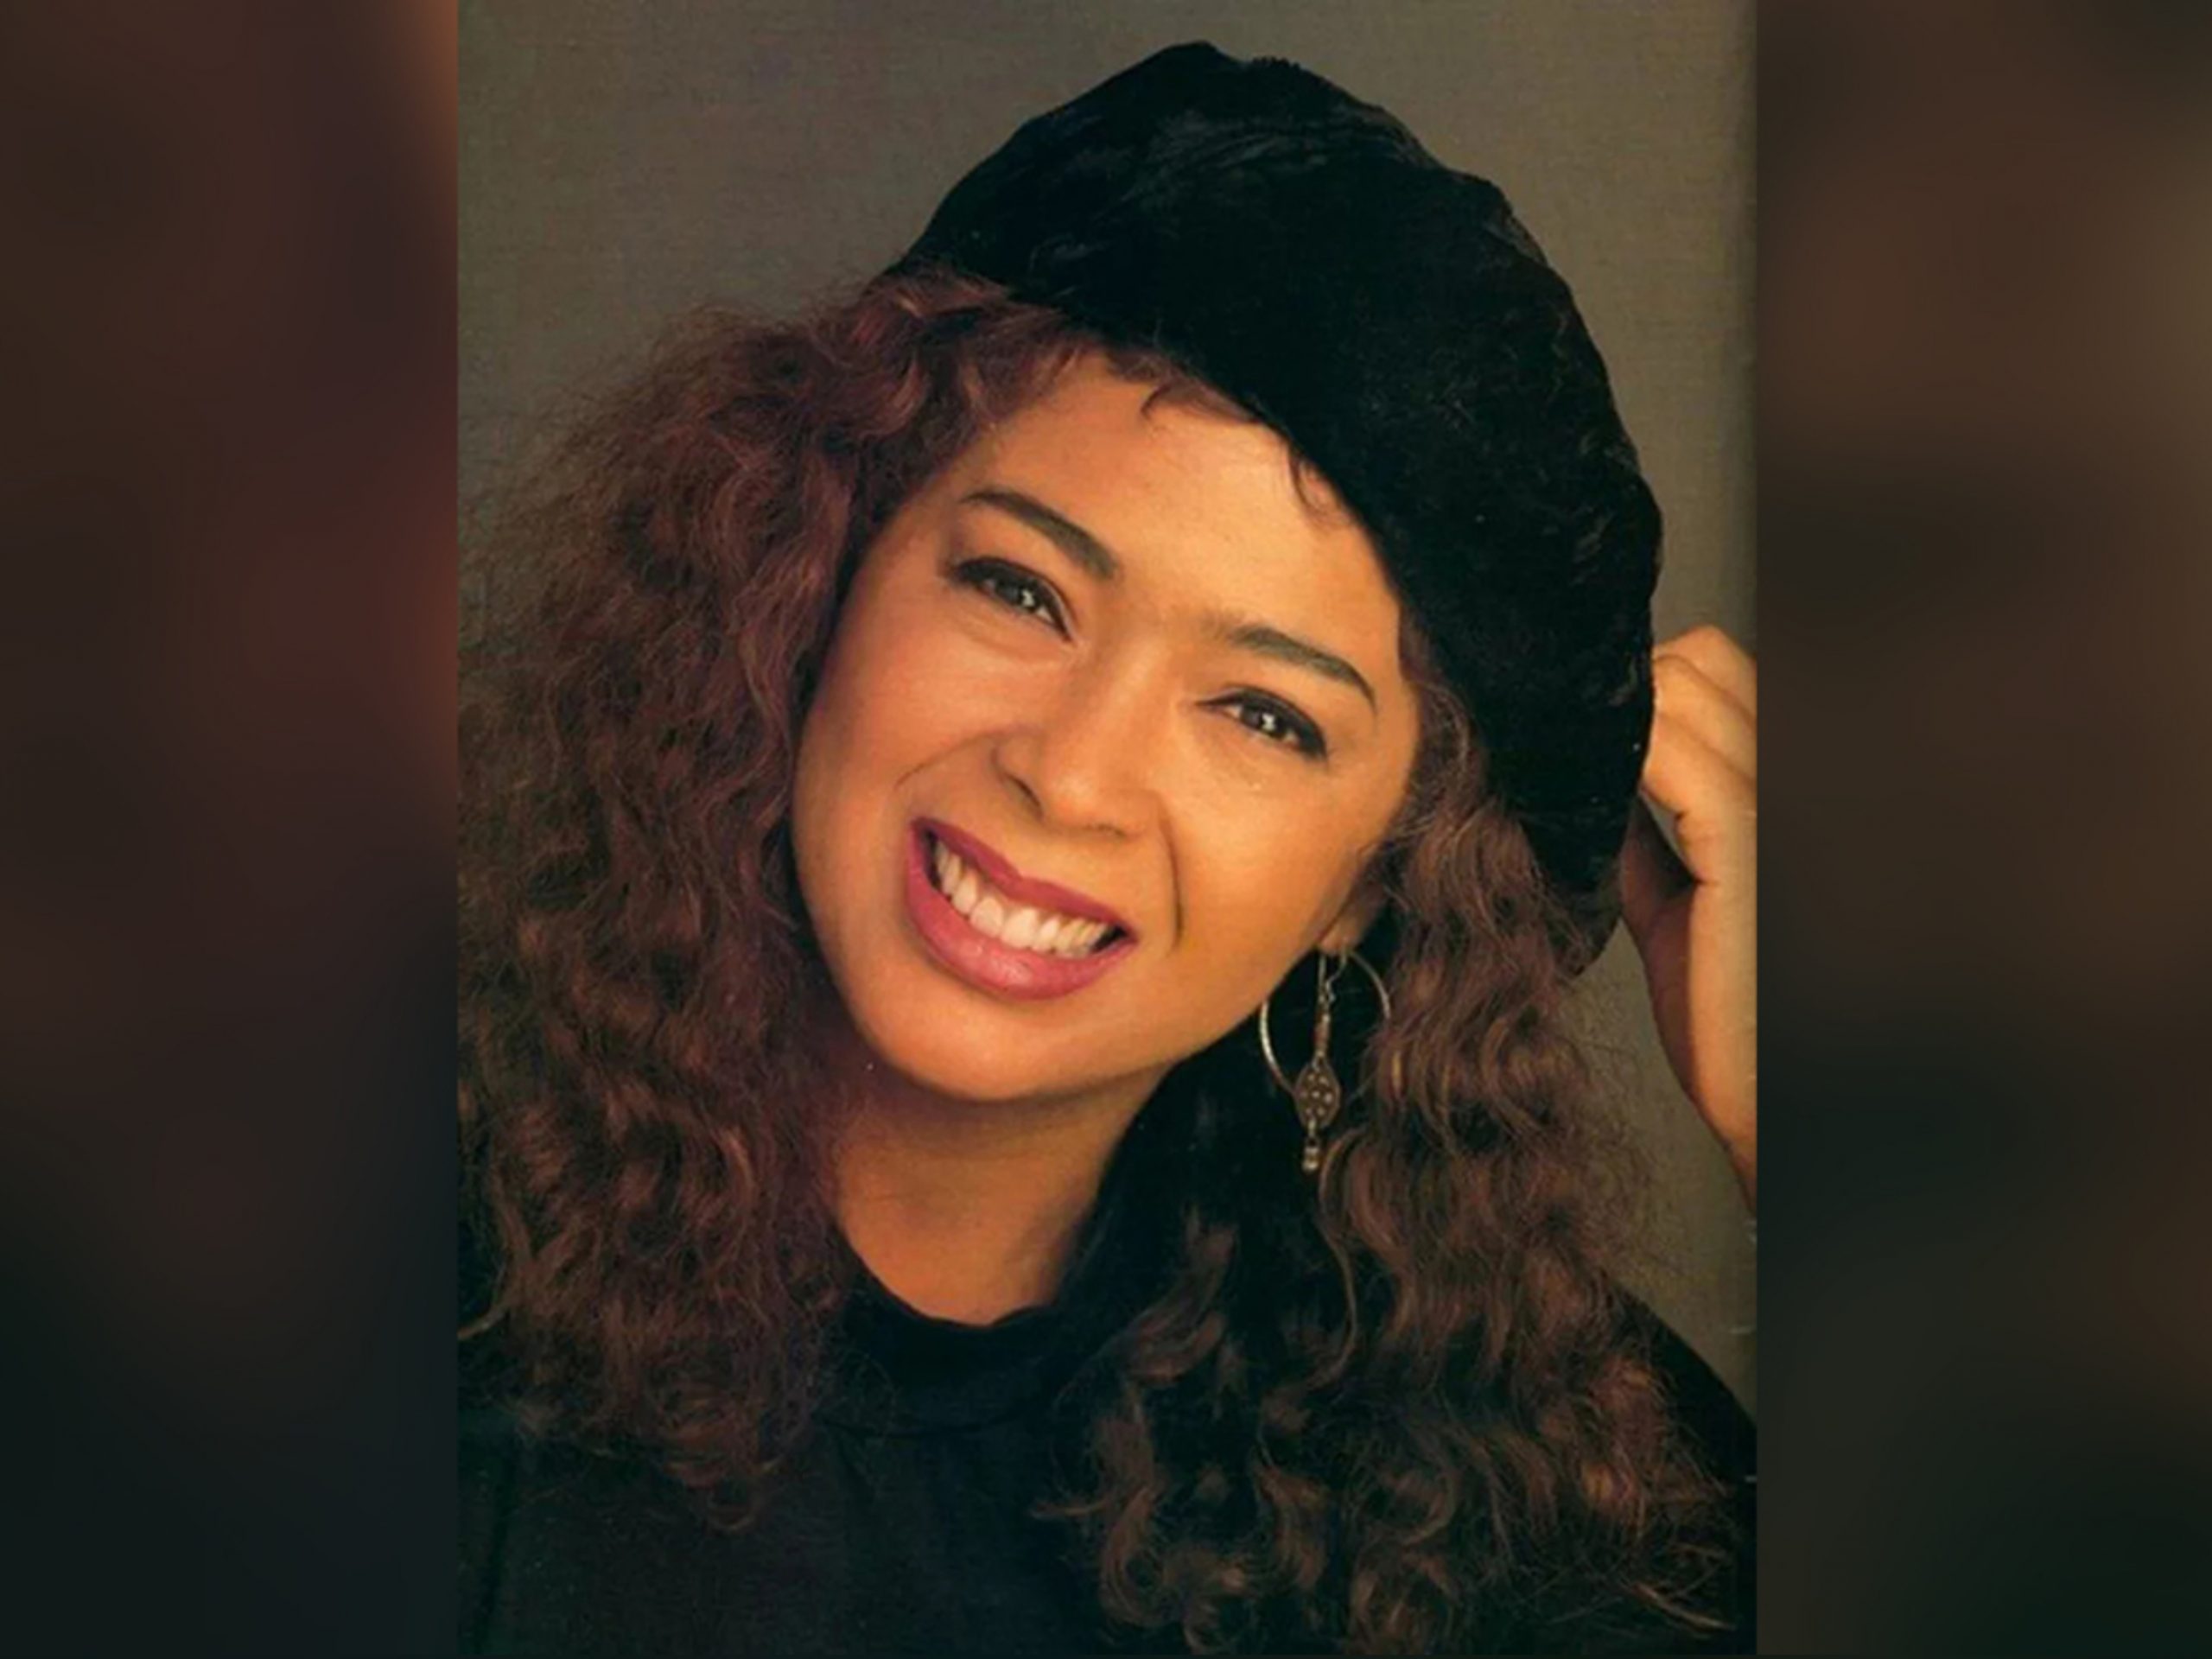 Irene Cara, 'Flame' Star and 'Flashdance' Singer, Passed Away At 63 Y